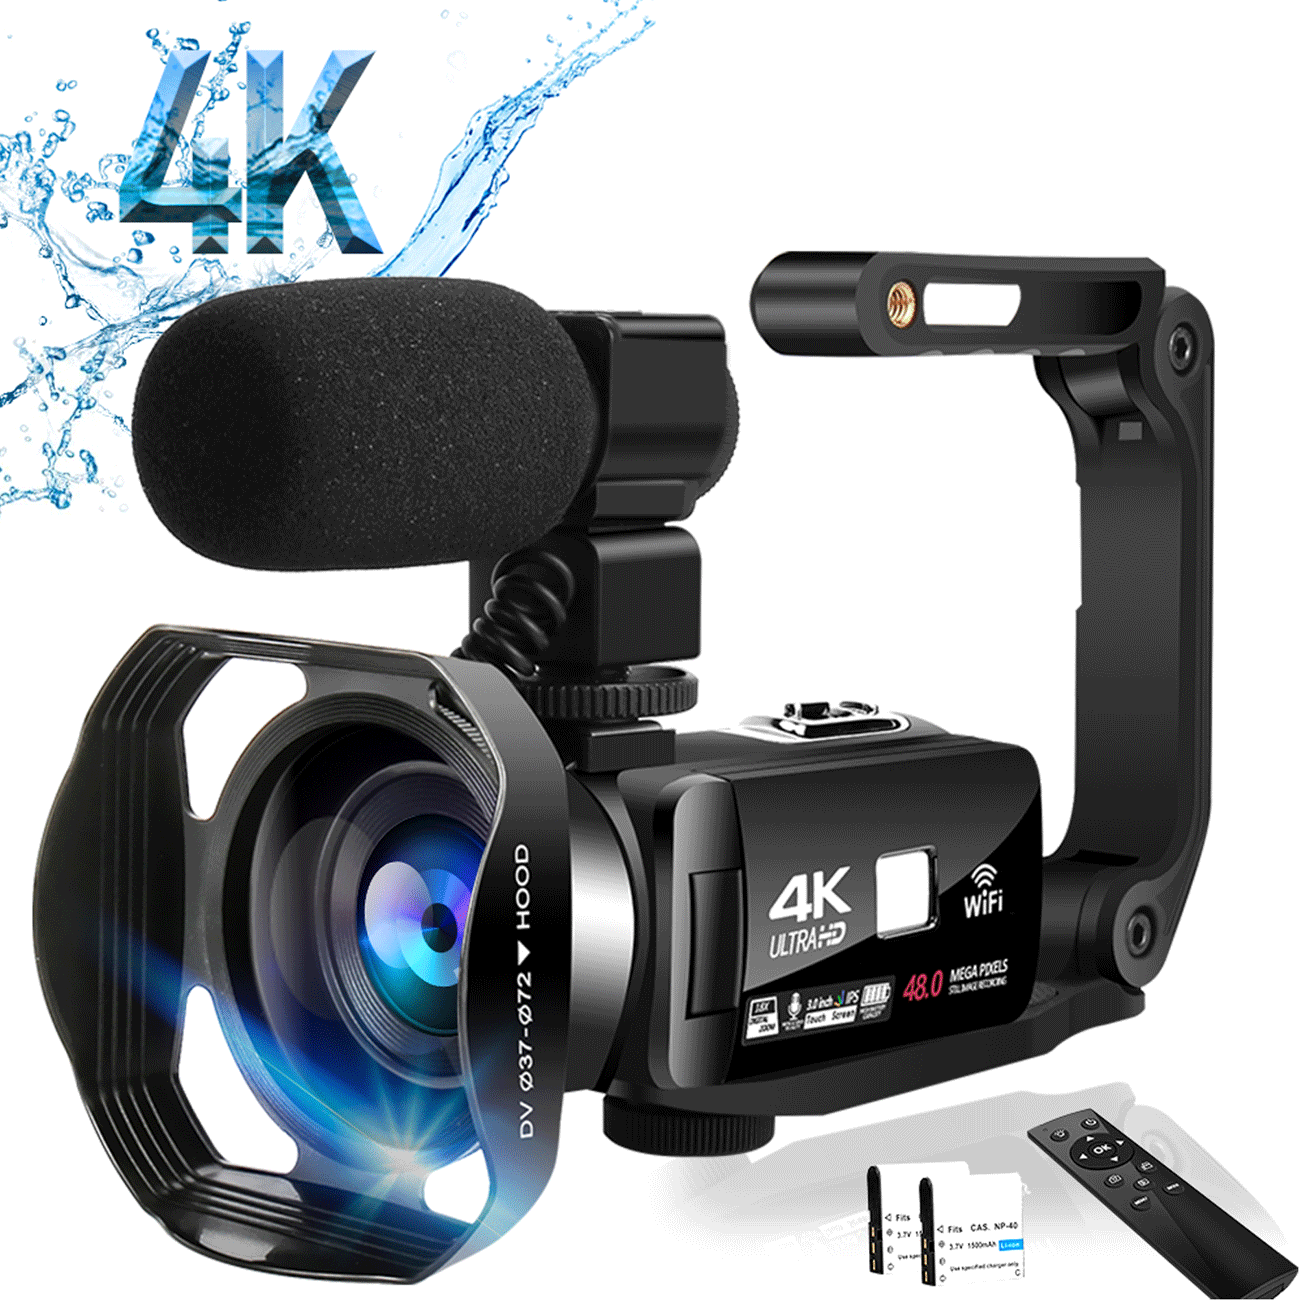 Support DIS Electronic Anti-Shake and Remote Control DV-FR485 Camcorder 3 Inch IPS Screen 48MP HD Digital Video Camera 4K Camcorder 16X Digital Zoom WiFi Camcorder Vlogging Camera